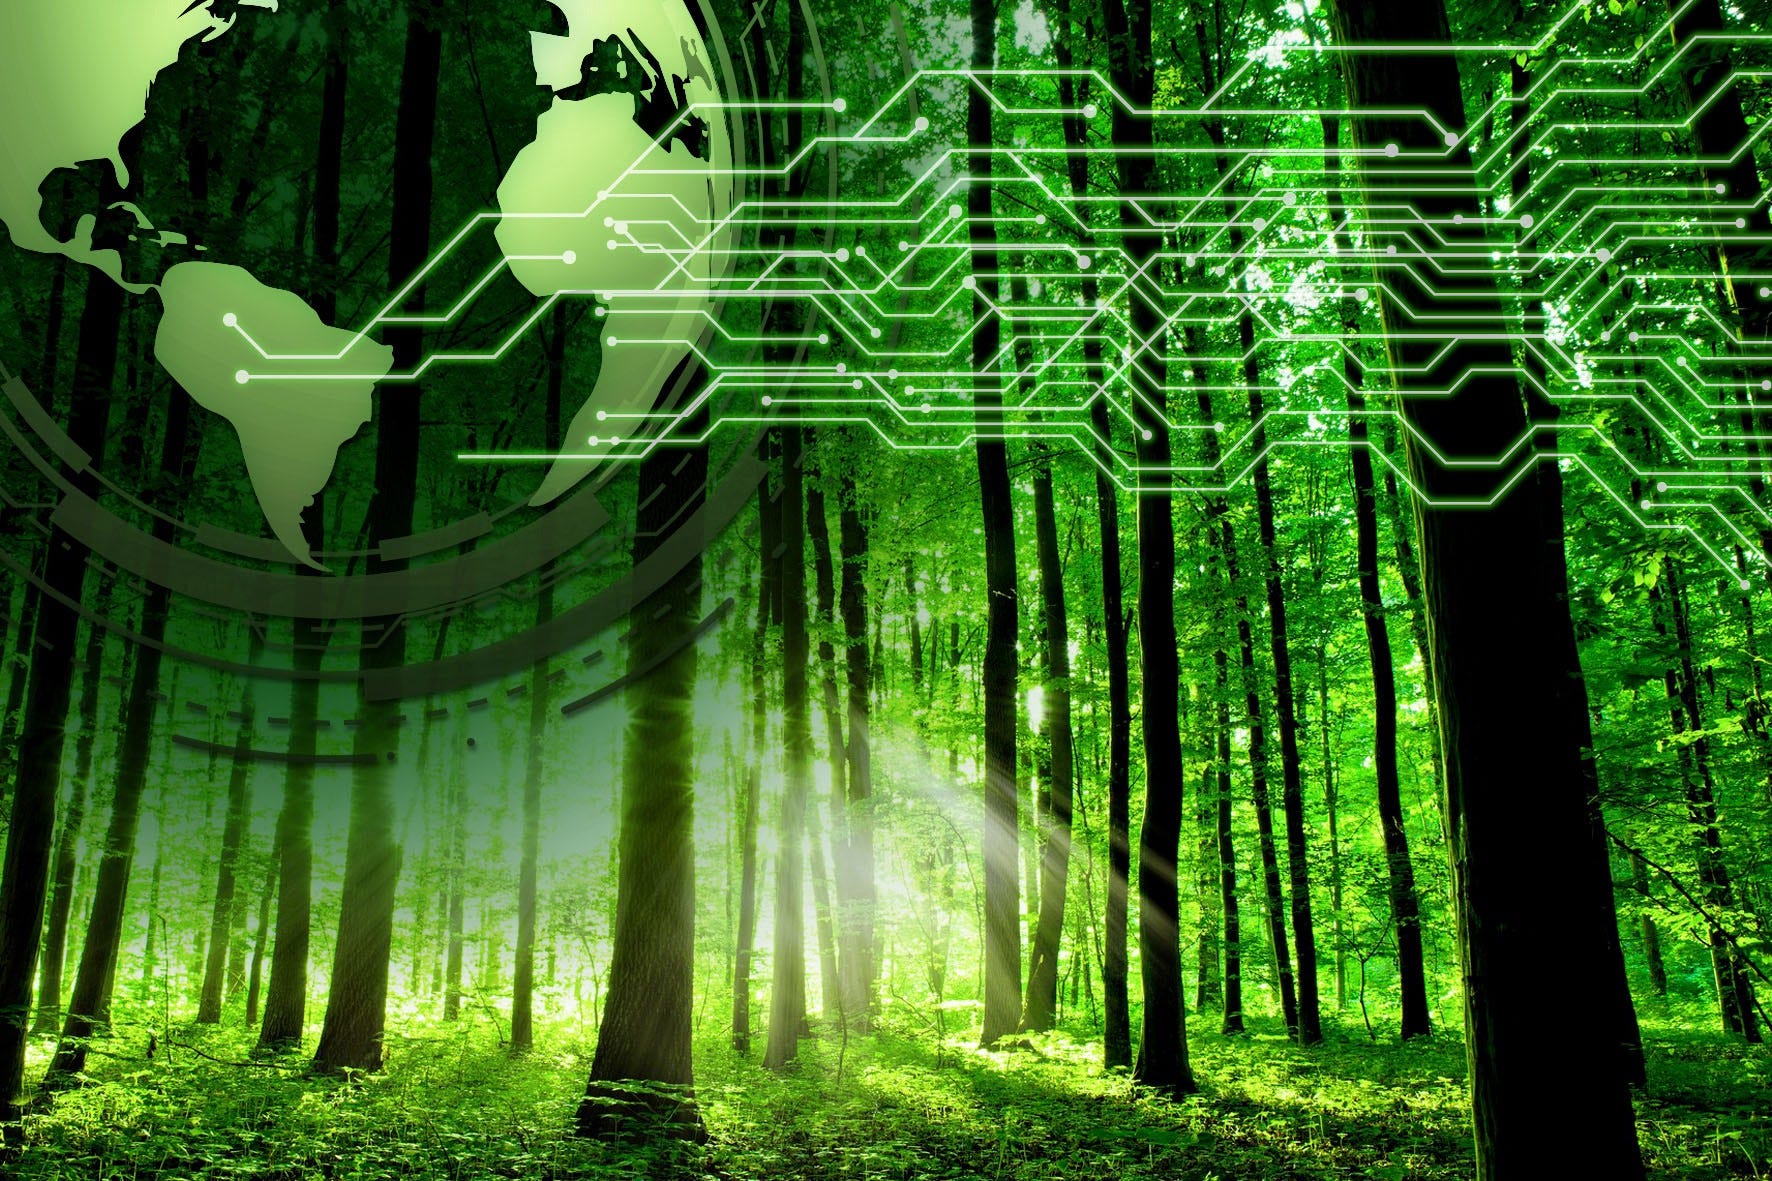 A vibrant forest with overlaying digital circuitry and a global map, symbolizing the intersection of nature and technology.